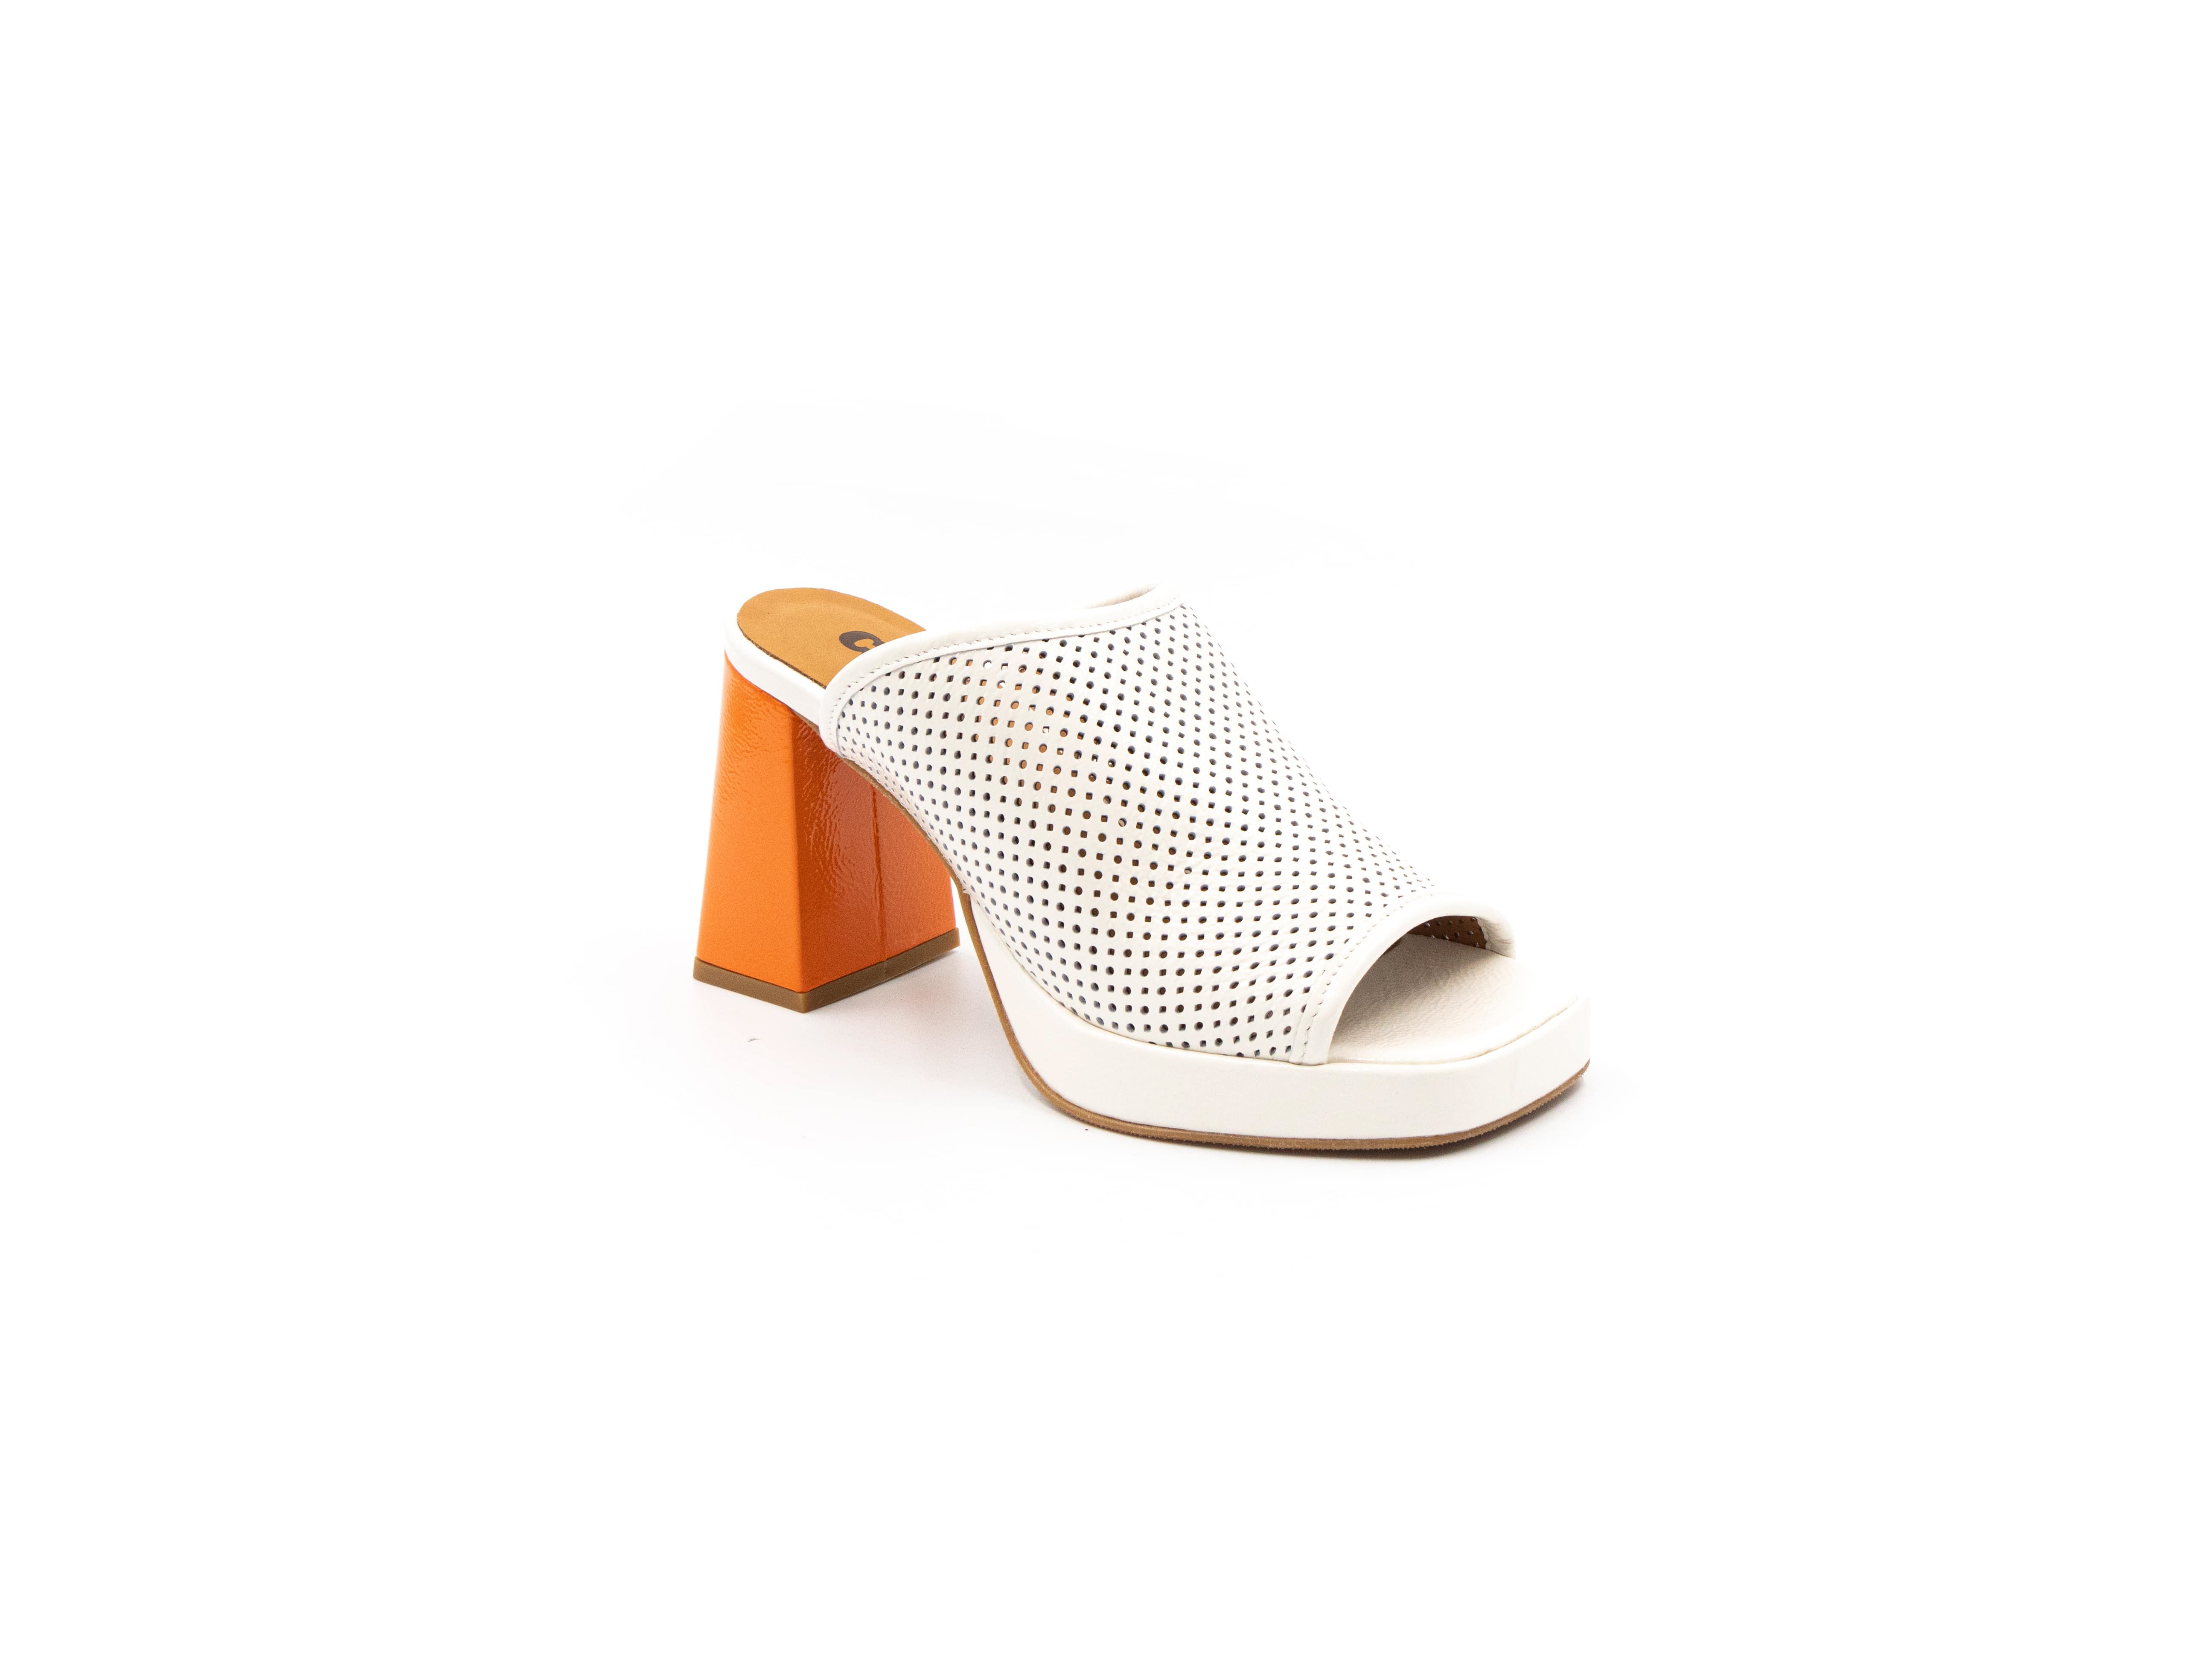 Perforated mules in white and orange.